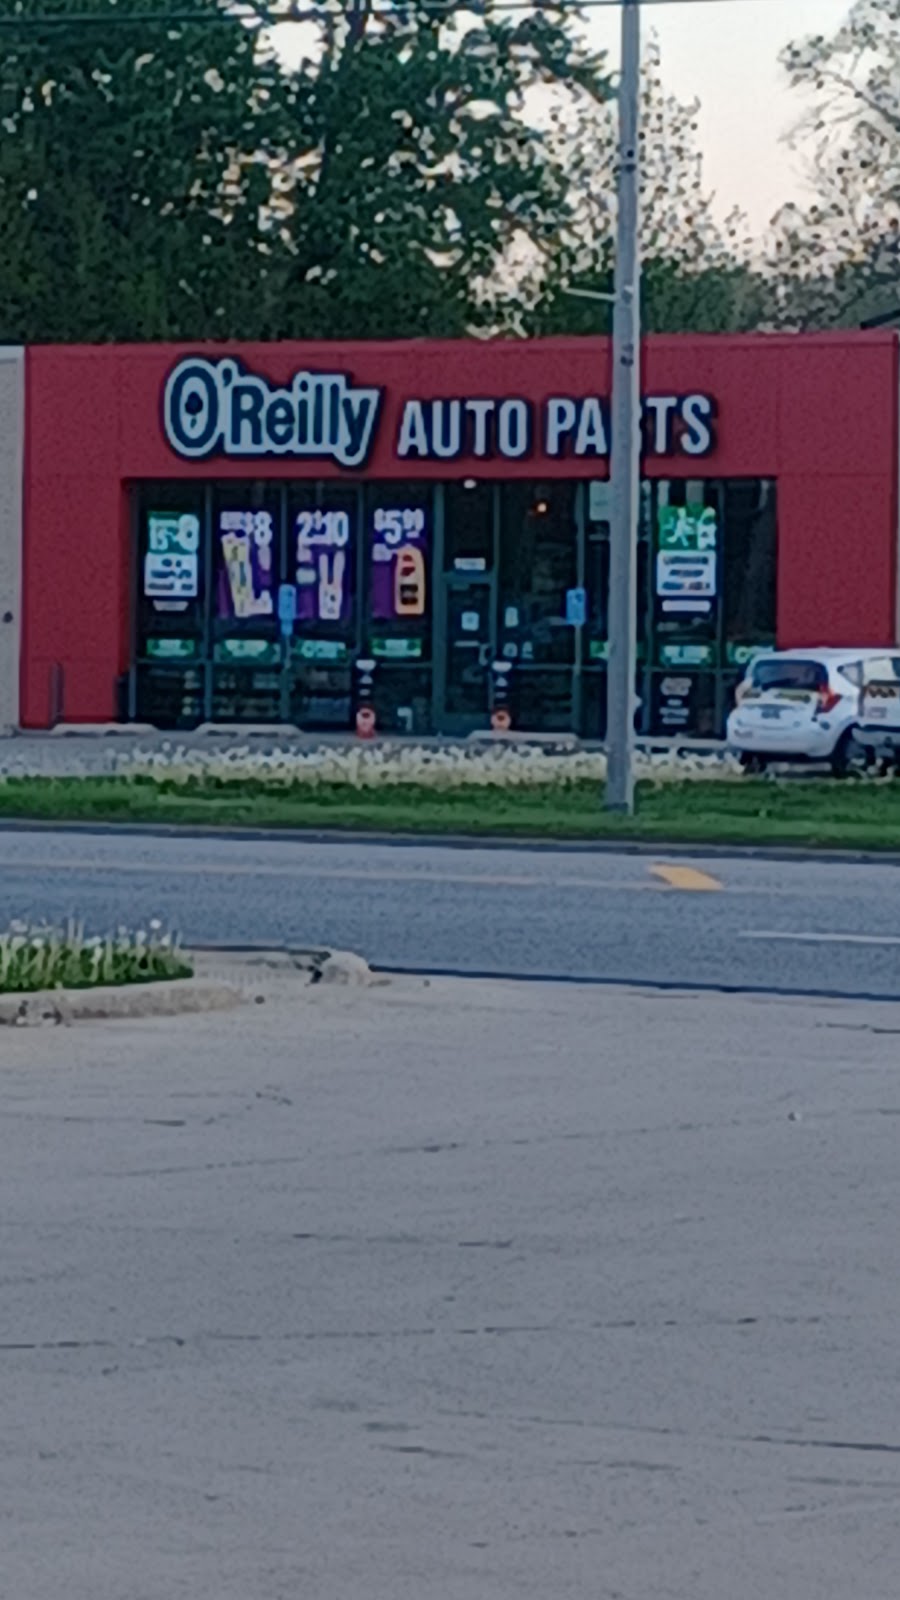 OReilly Auto Parts | 14230 S Cicero Ave, Crestwood, IL 60418 | Phone: (708) 629-7101